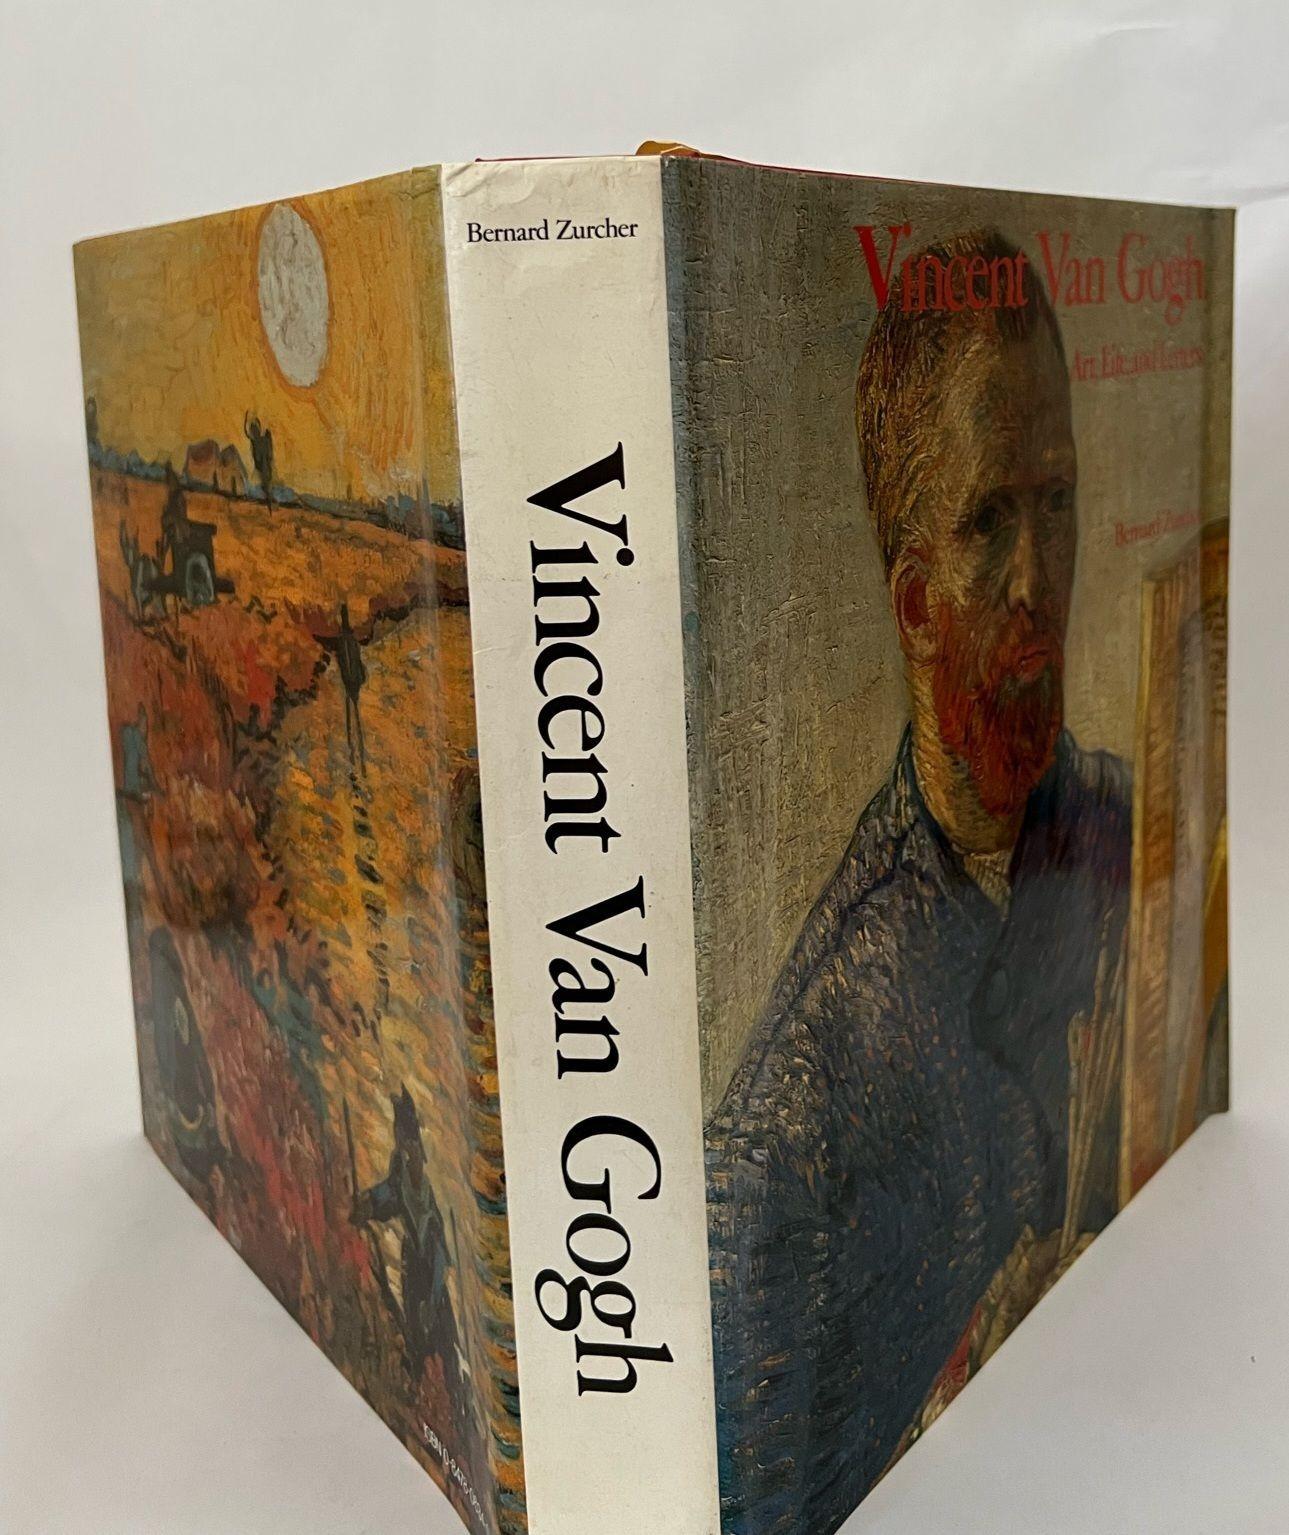 1985 Vincent Van Gogh Art Life and Letters by Bernard Zucker Hardcover Rizzolli For Sale 4